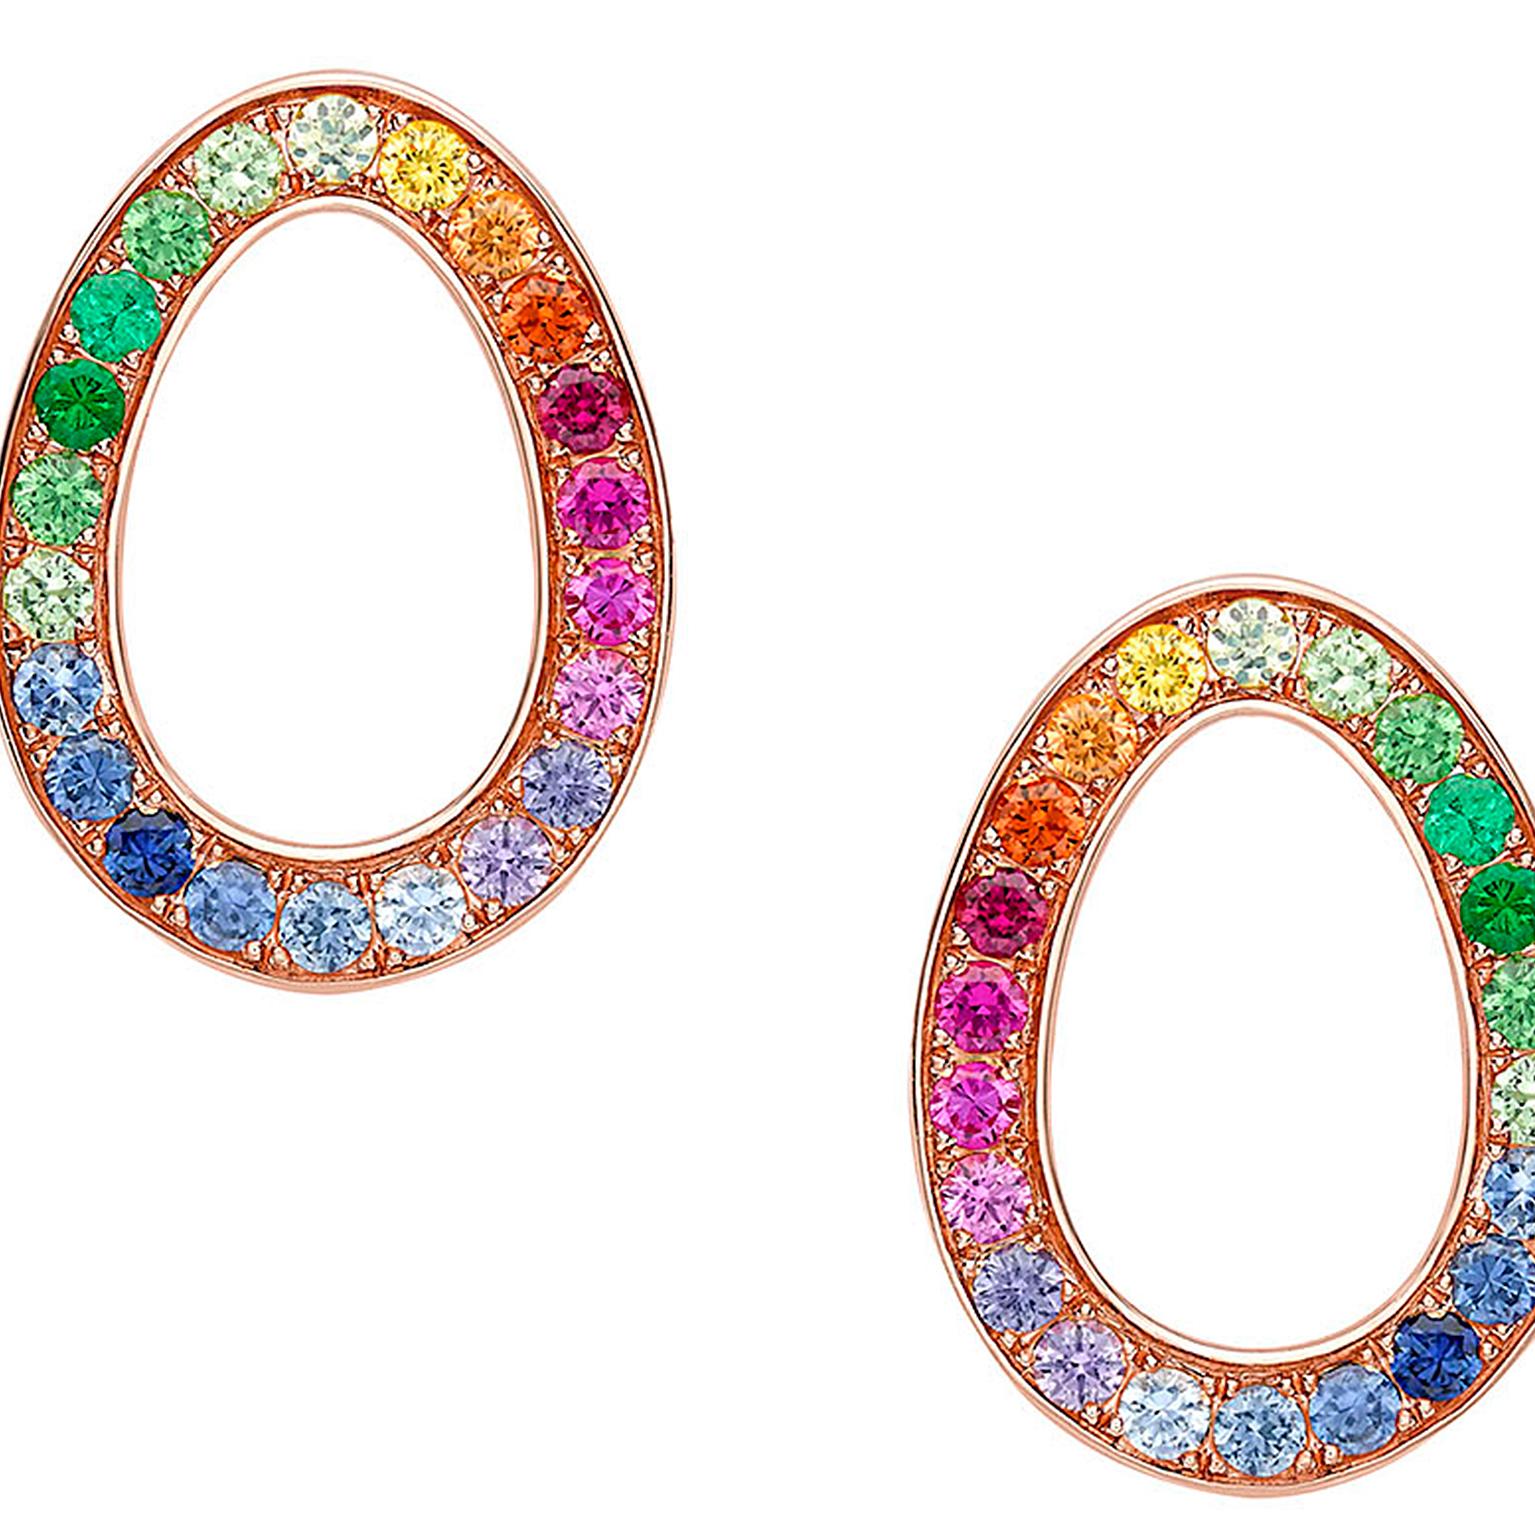 These striking Colours of Love Sasha Rose Gold Rainbow Egg Stud Earrings feature an array of emeralds, sapphires, garnets, rubies and tsavorites. The earrings are set in 18kt rose gold and are 12x9mm in size. In keeping with Fabergé's fondness for